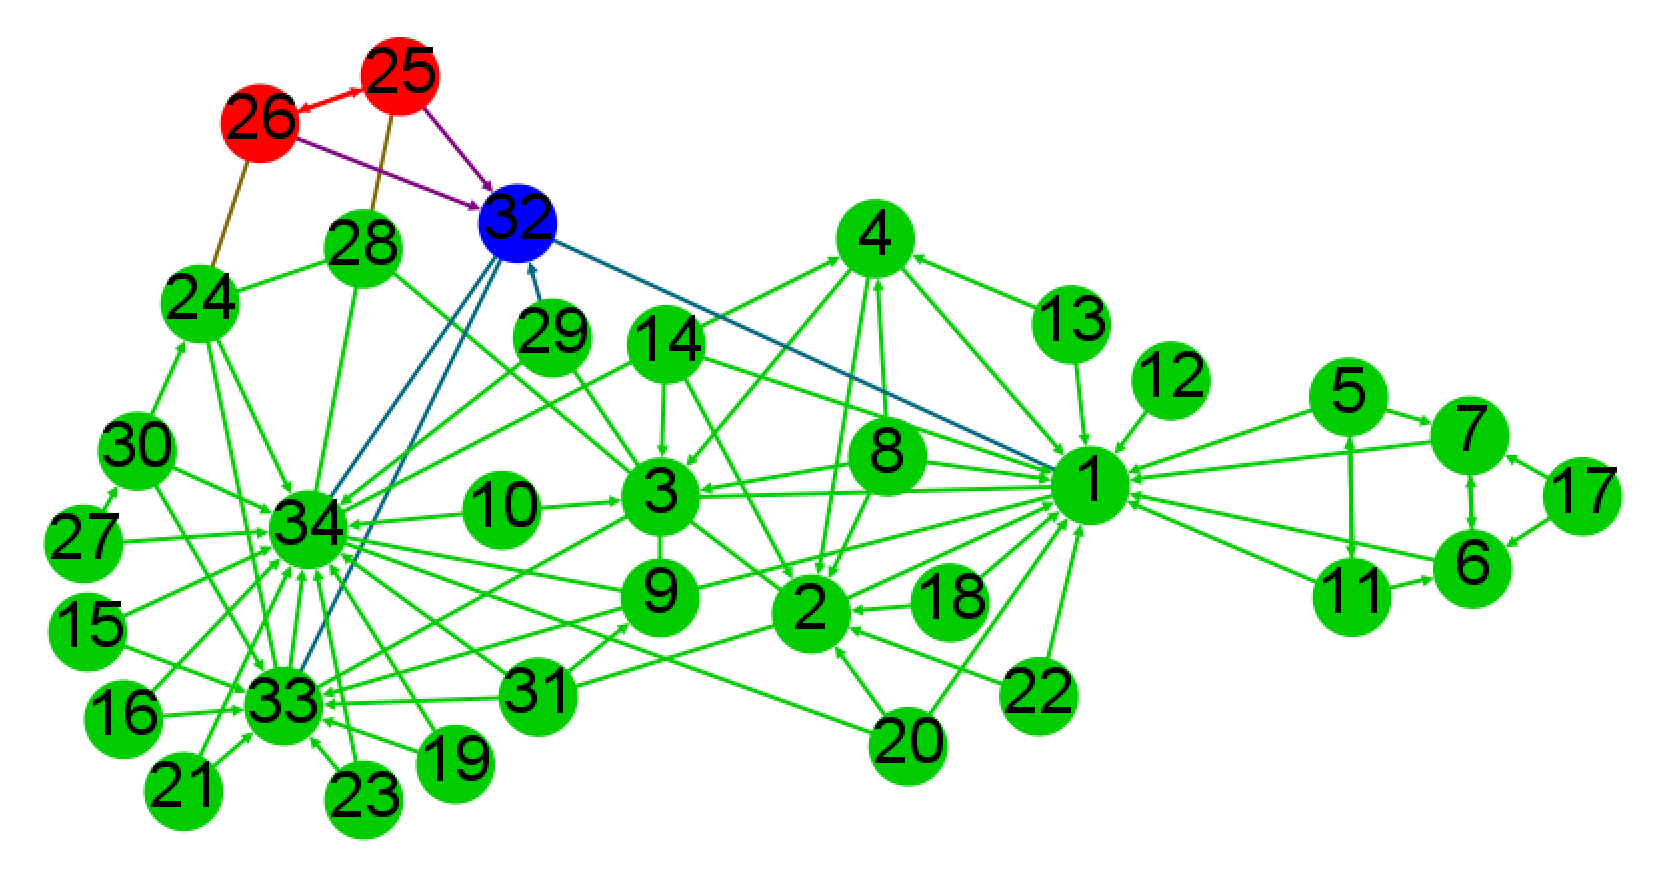 Zone generated by nodes 25 or 26